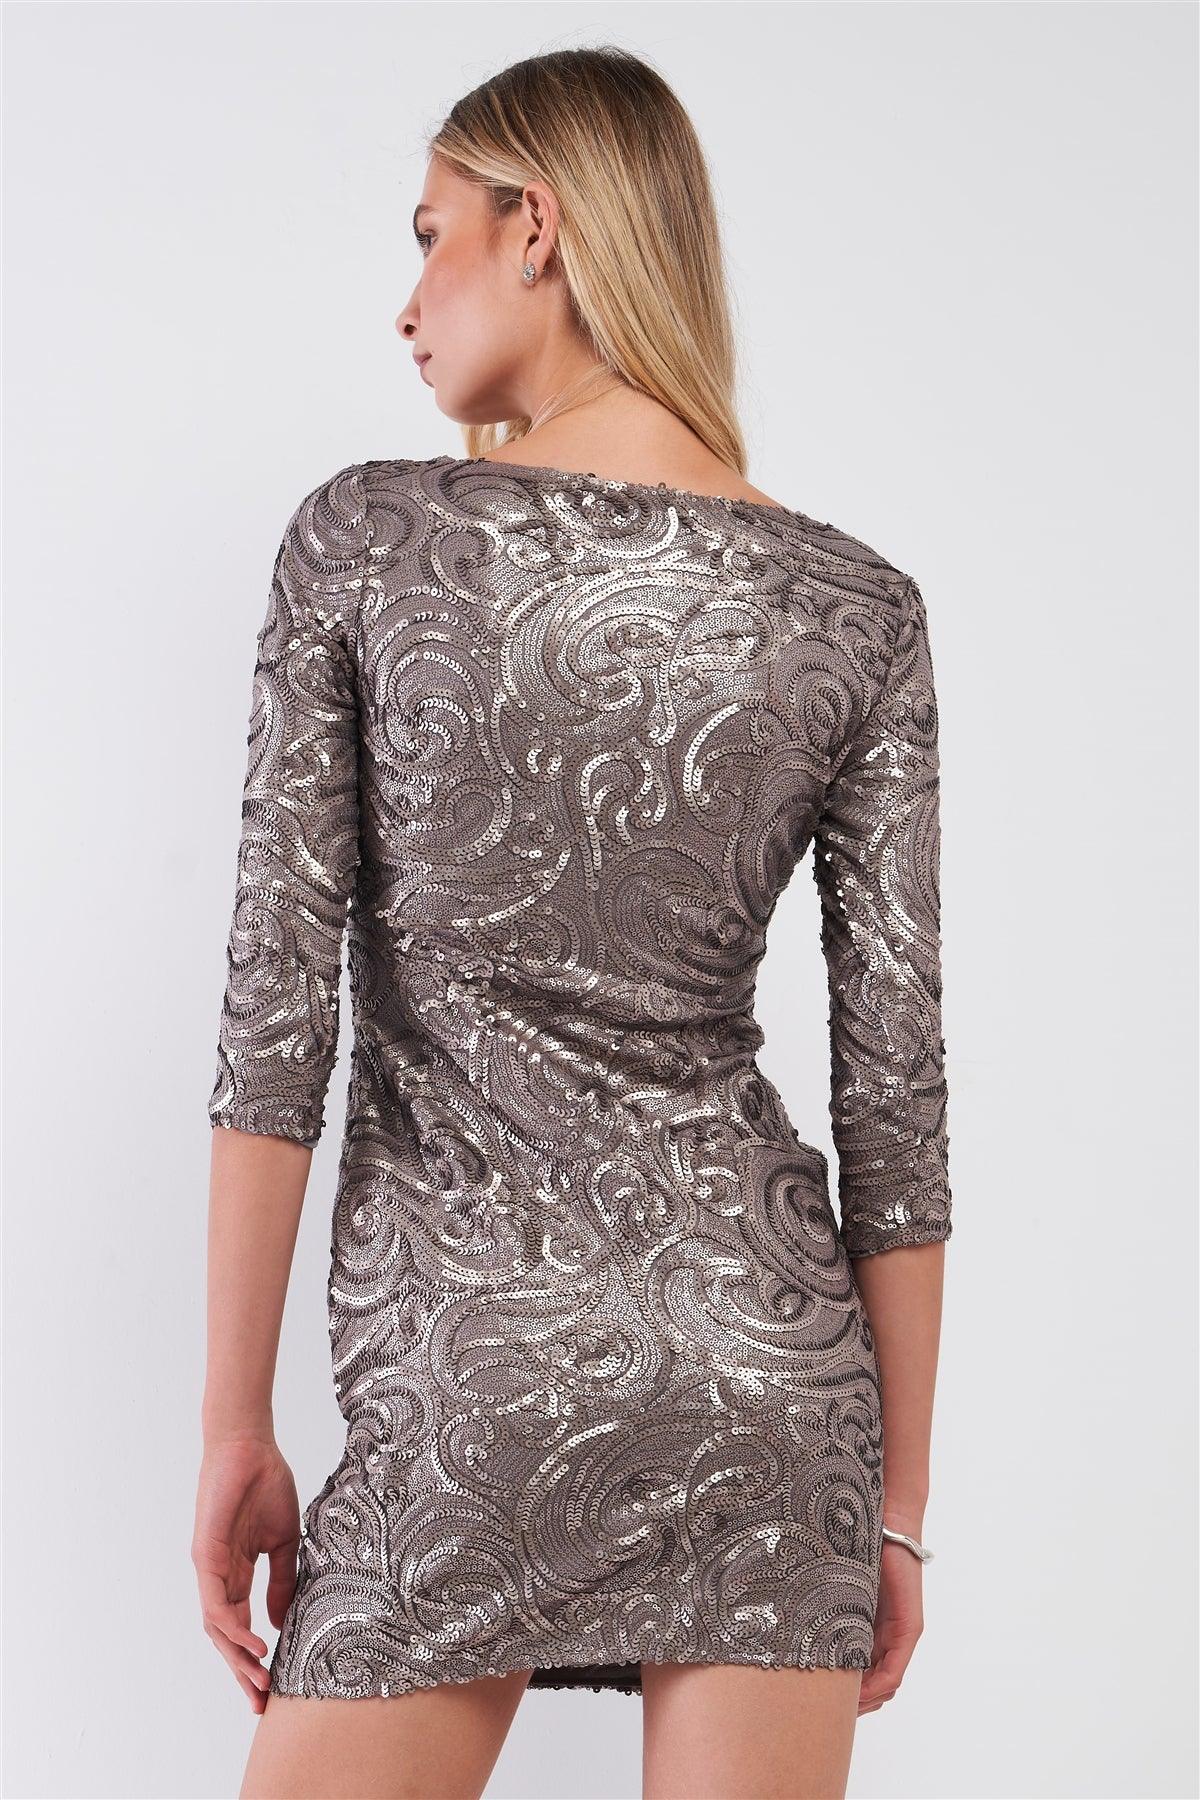 Ancient Oxidized Gold Sequin Embroidery Midi Sleeve Round Neck Fitted Mini Dress